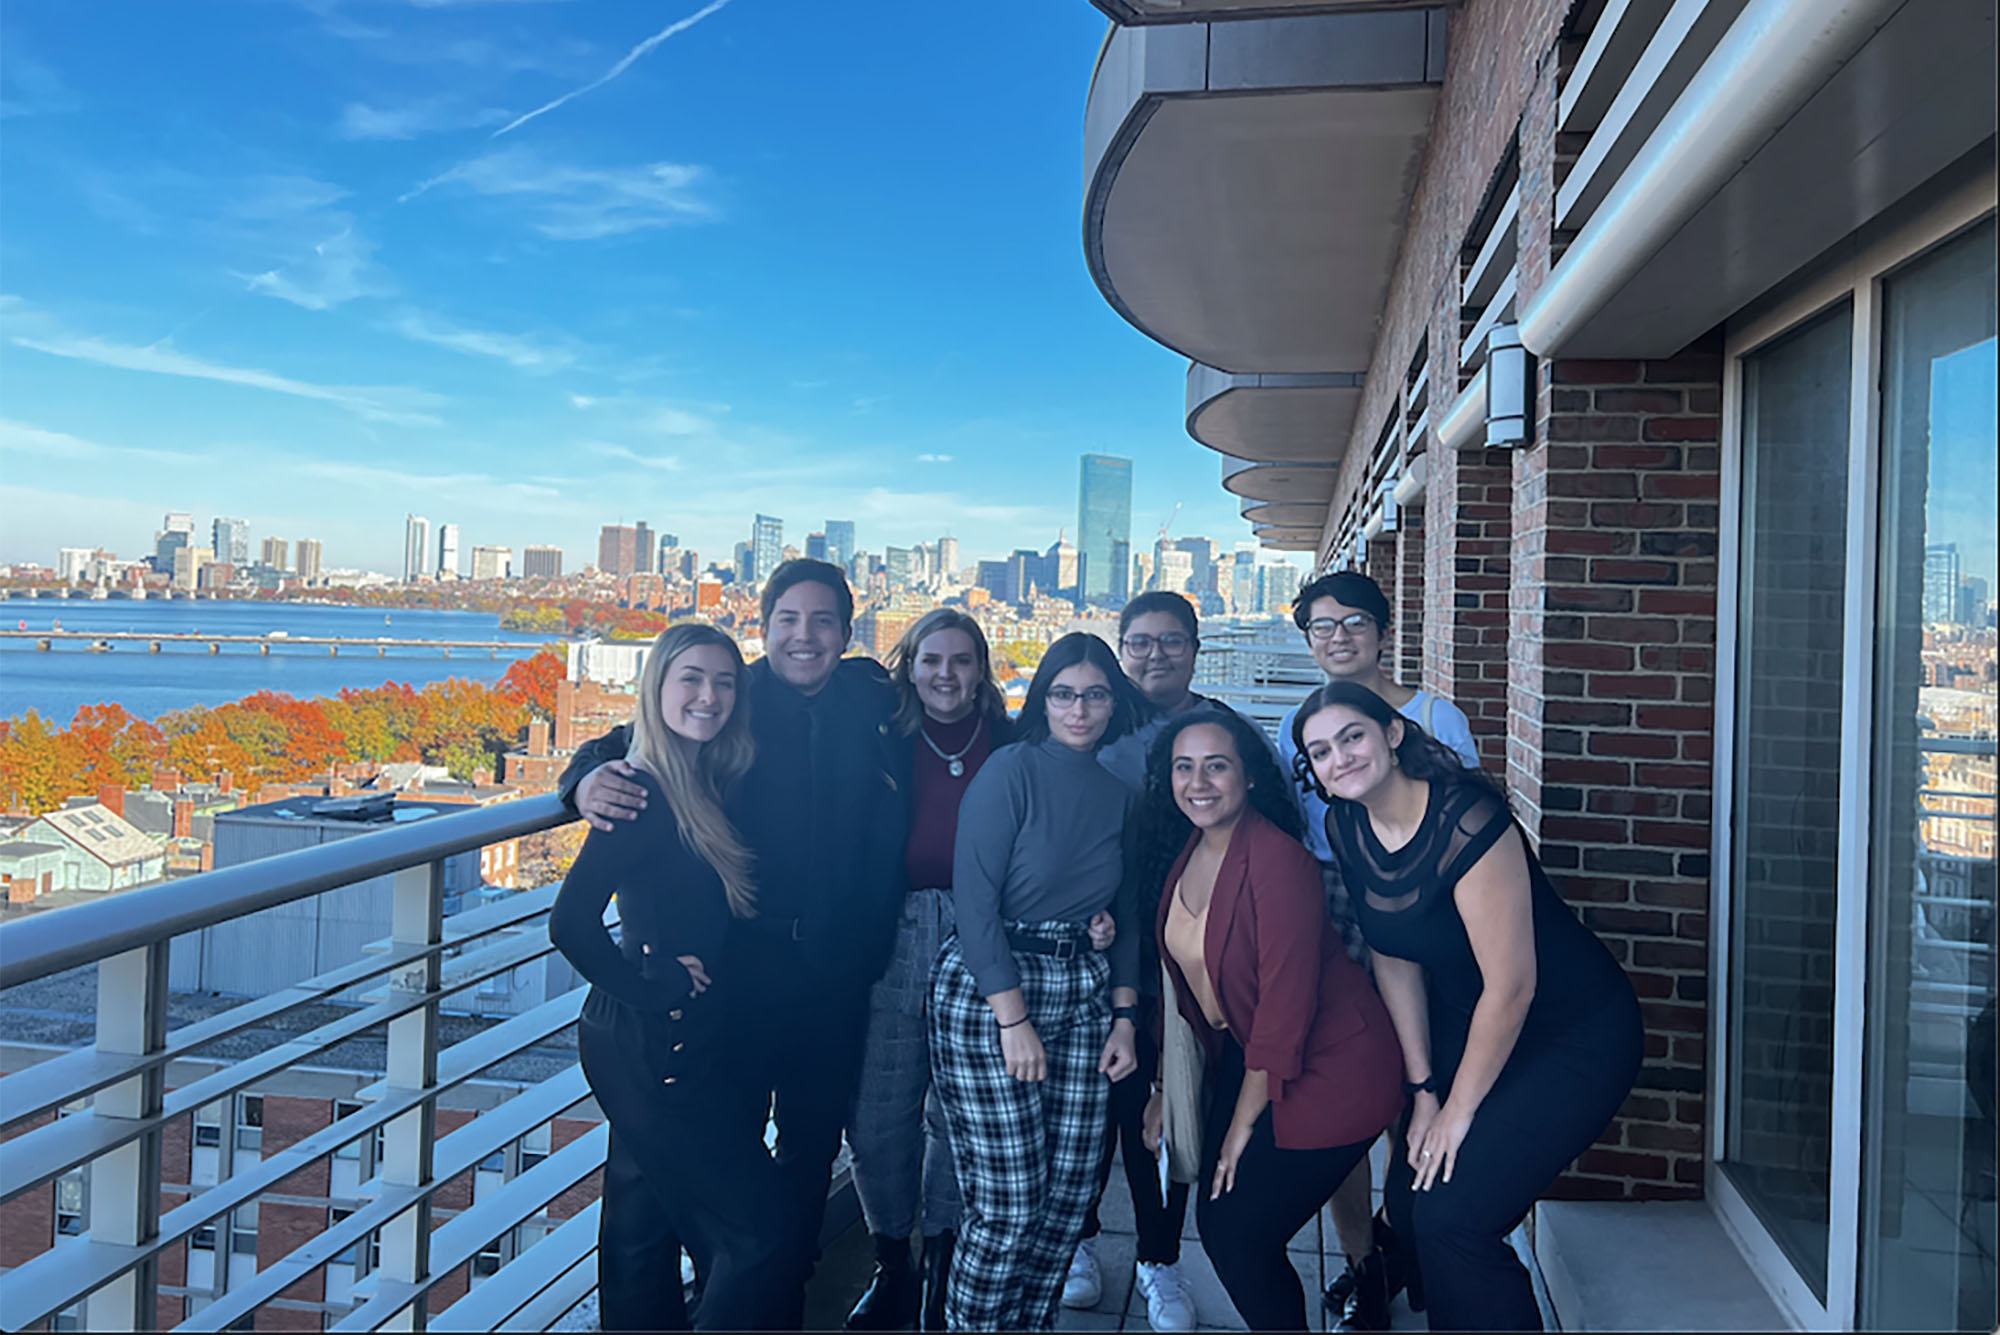 Photo: A group of young adults standing outside a balcony with the Boston skyline in the background. The foliage around them is green, red, and orange, indicating that is is fall outside. The members of the group are all smiling. From left, a blonde woman with straight hair wears all black. Next to her, with his arms around her shoulders, stands a man in all black with a deeper-tone skin and short, dark hair. Next to him is a shorter individual, feminine-presenting with shoulder length hair. She wears a maroon shirt and plaid pants. In front, in the middle of the group, is a woman with short, dark hair, glasses and she is wearing a gray long-sleeve shirt and plaid pants. Next to her are two woman, one with long, curly hair and the other with long, dark straight hair. The curly-haired individual wears a maroon cardigan, a tan shirt, and jeans. The other individual is in all black. Behind the pair is another pair of men, both with short, dark hair and glasses. The entire group smiling.